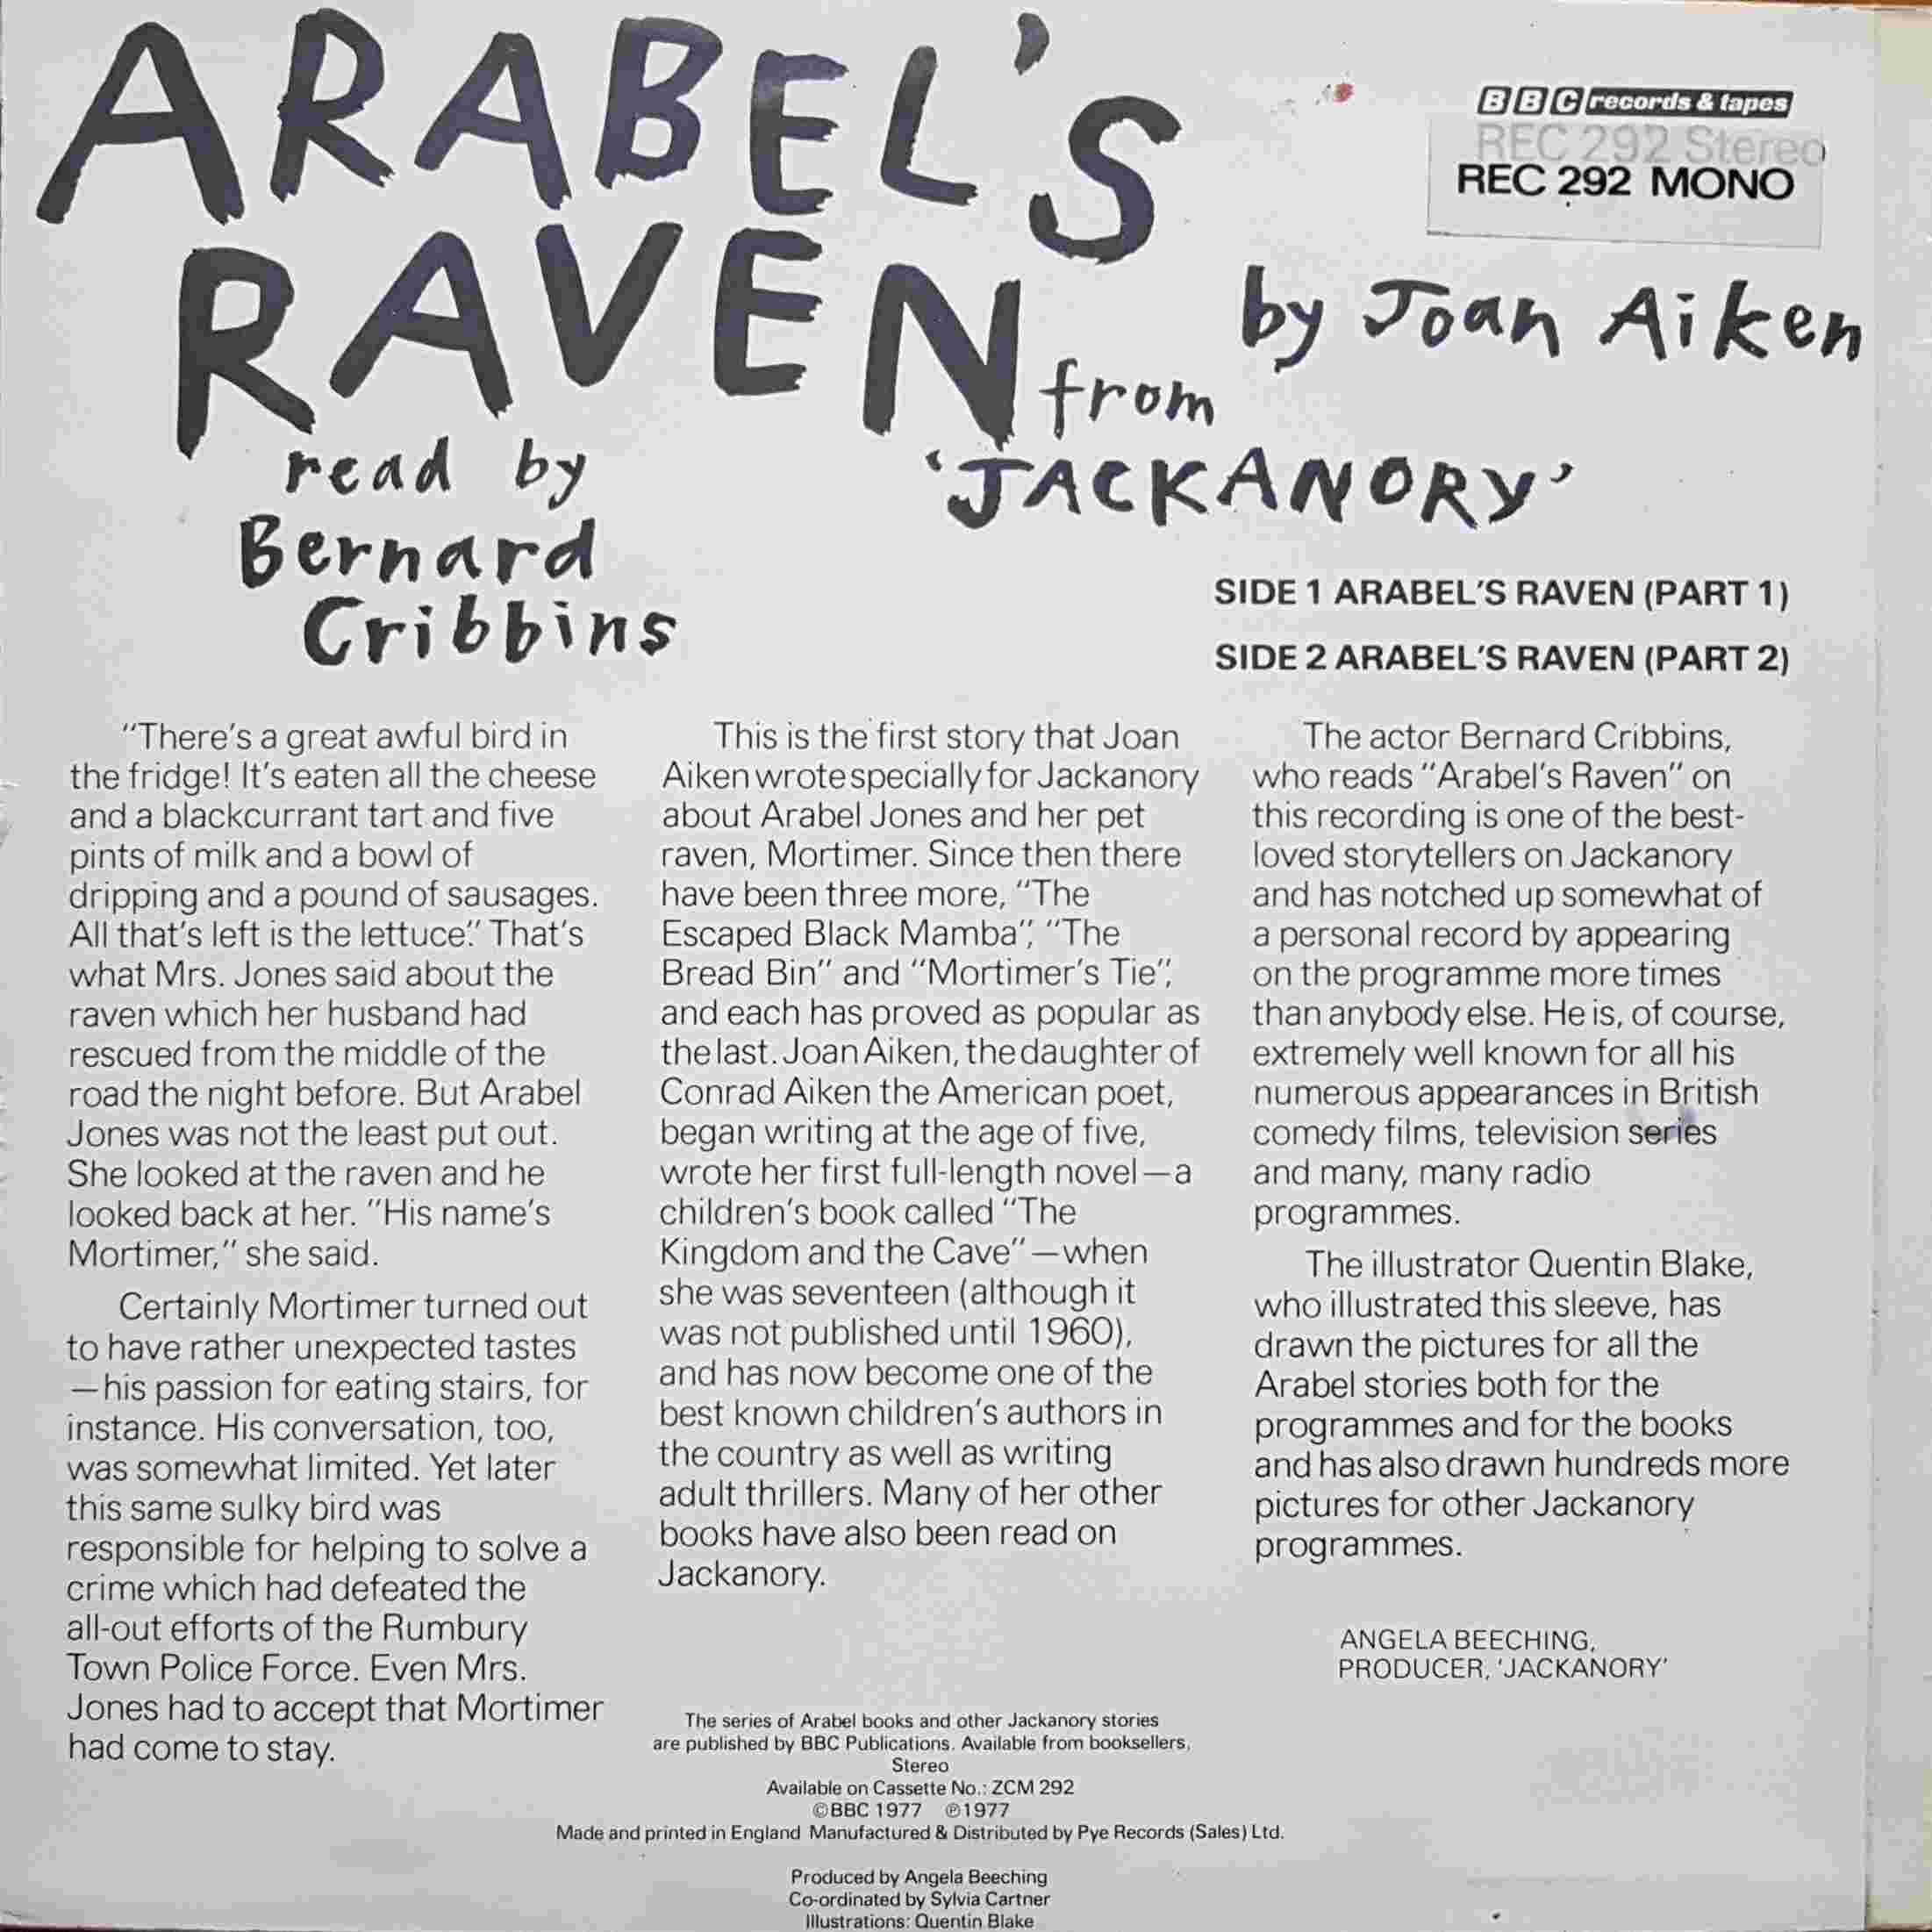 Picture of REC 292 Jackanory - Arabel's raven by artist Bernard Cribbins from the BBC records and Tapes library